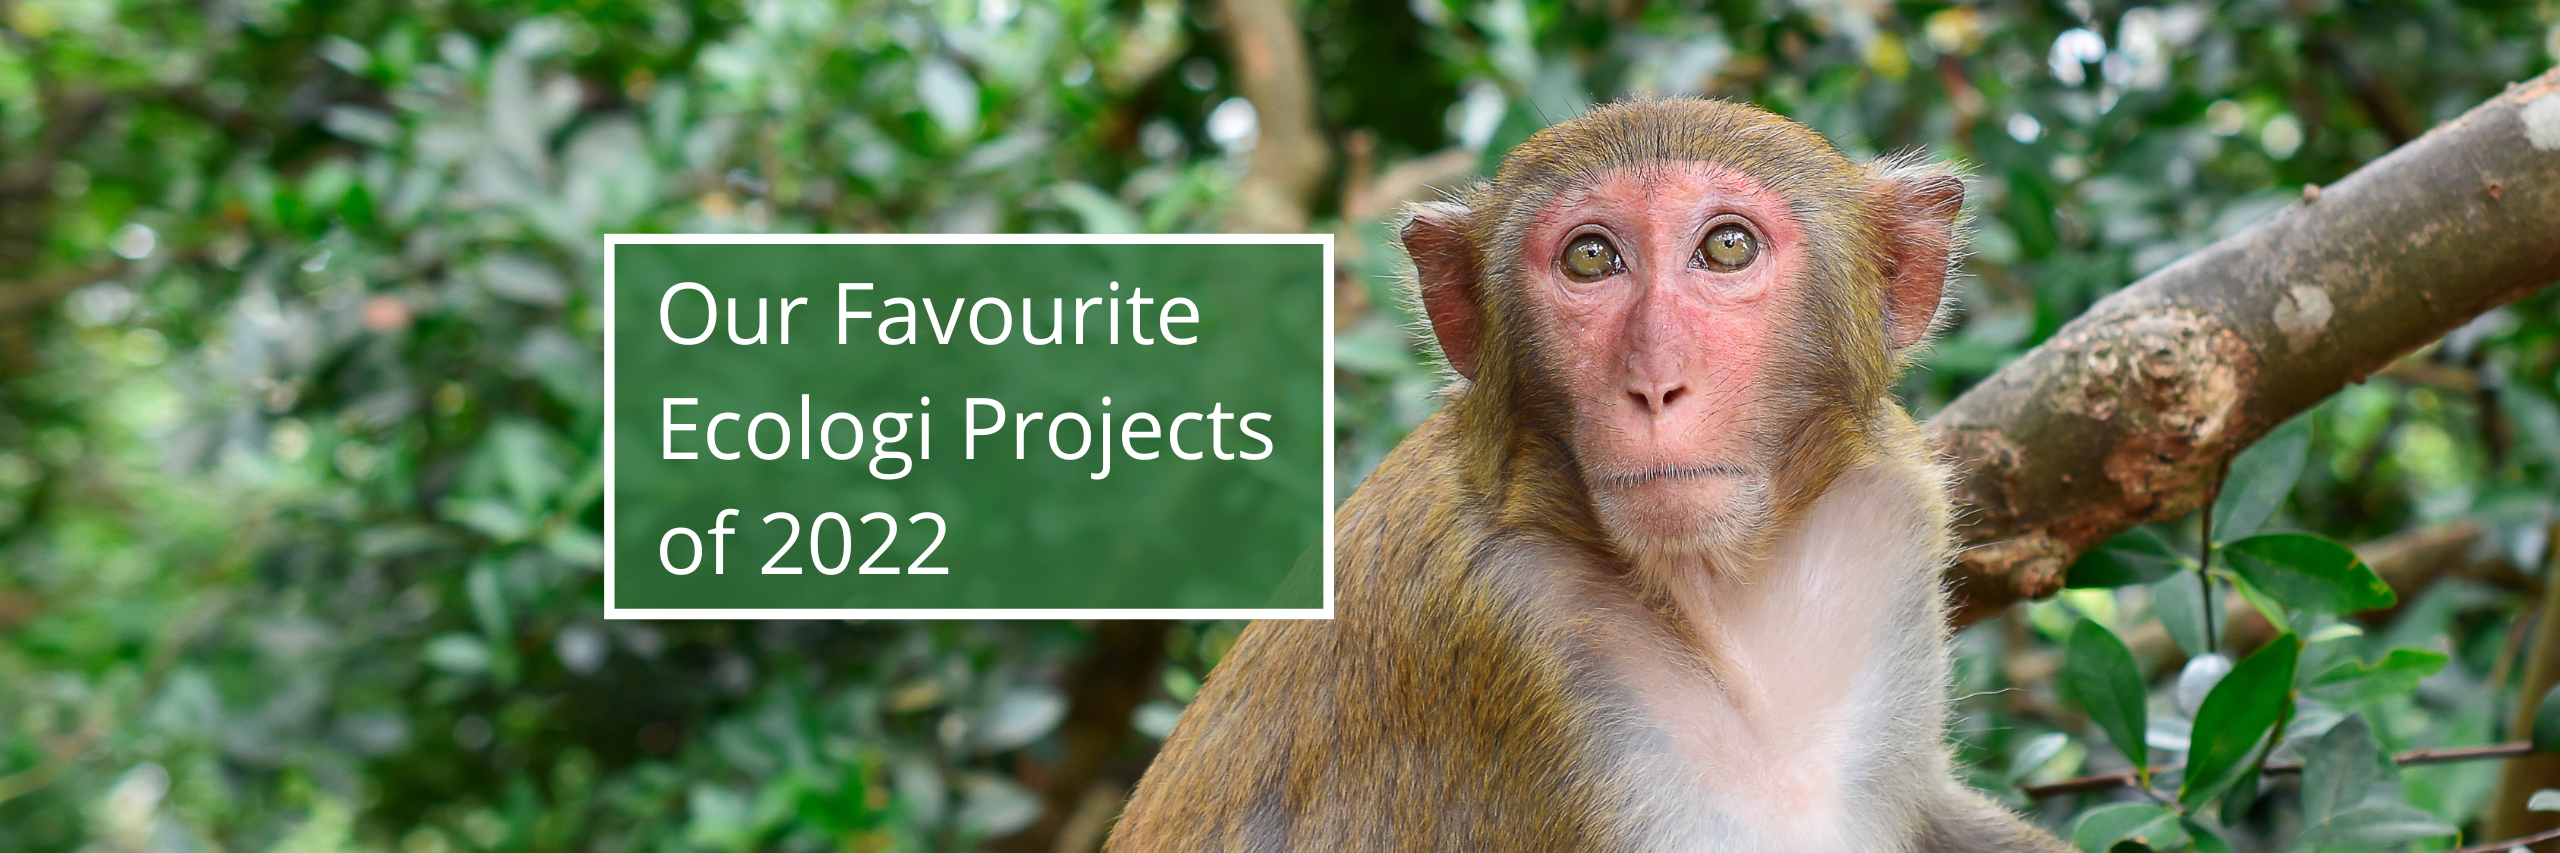 Our Favourite Ecologi Projects of 2022